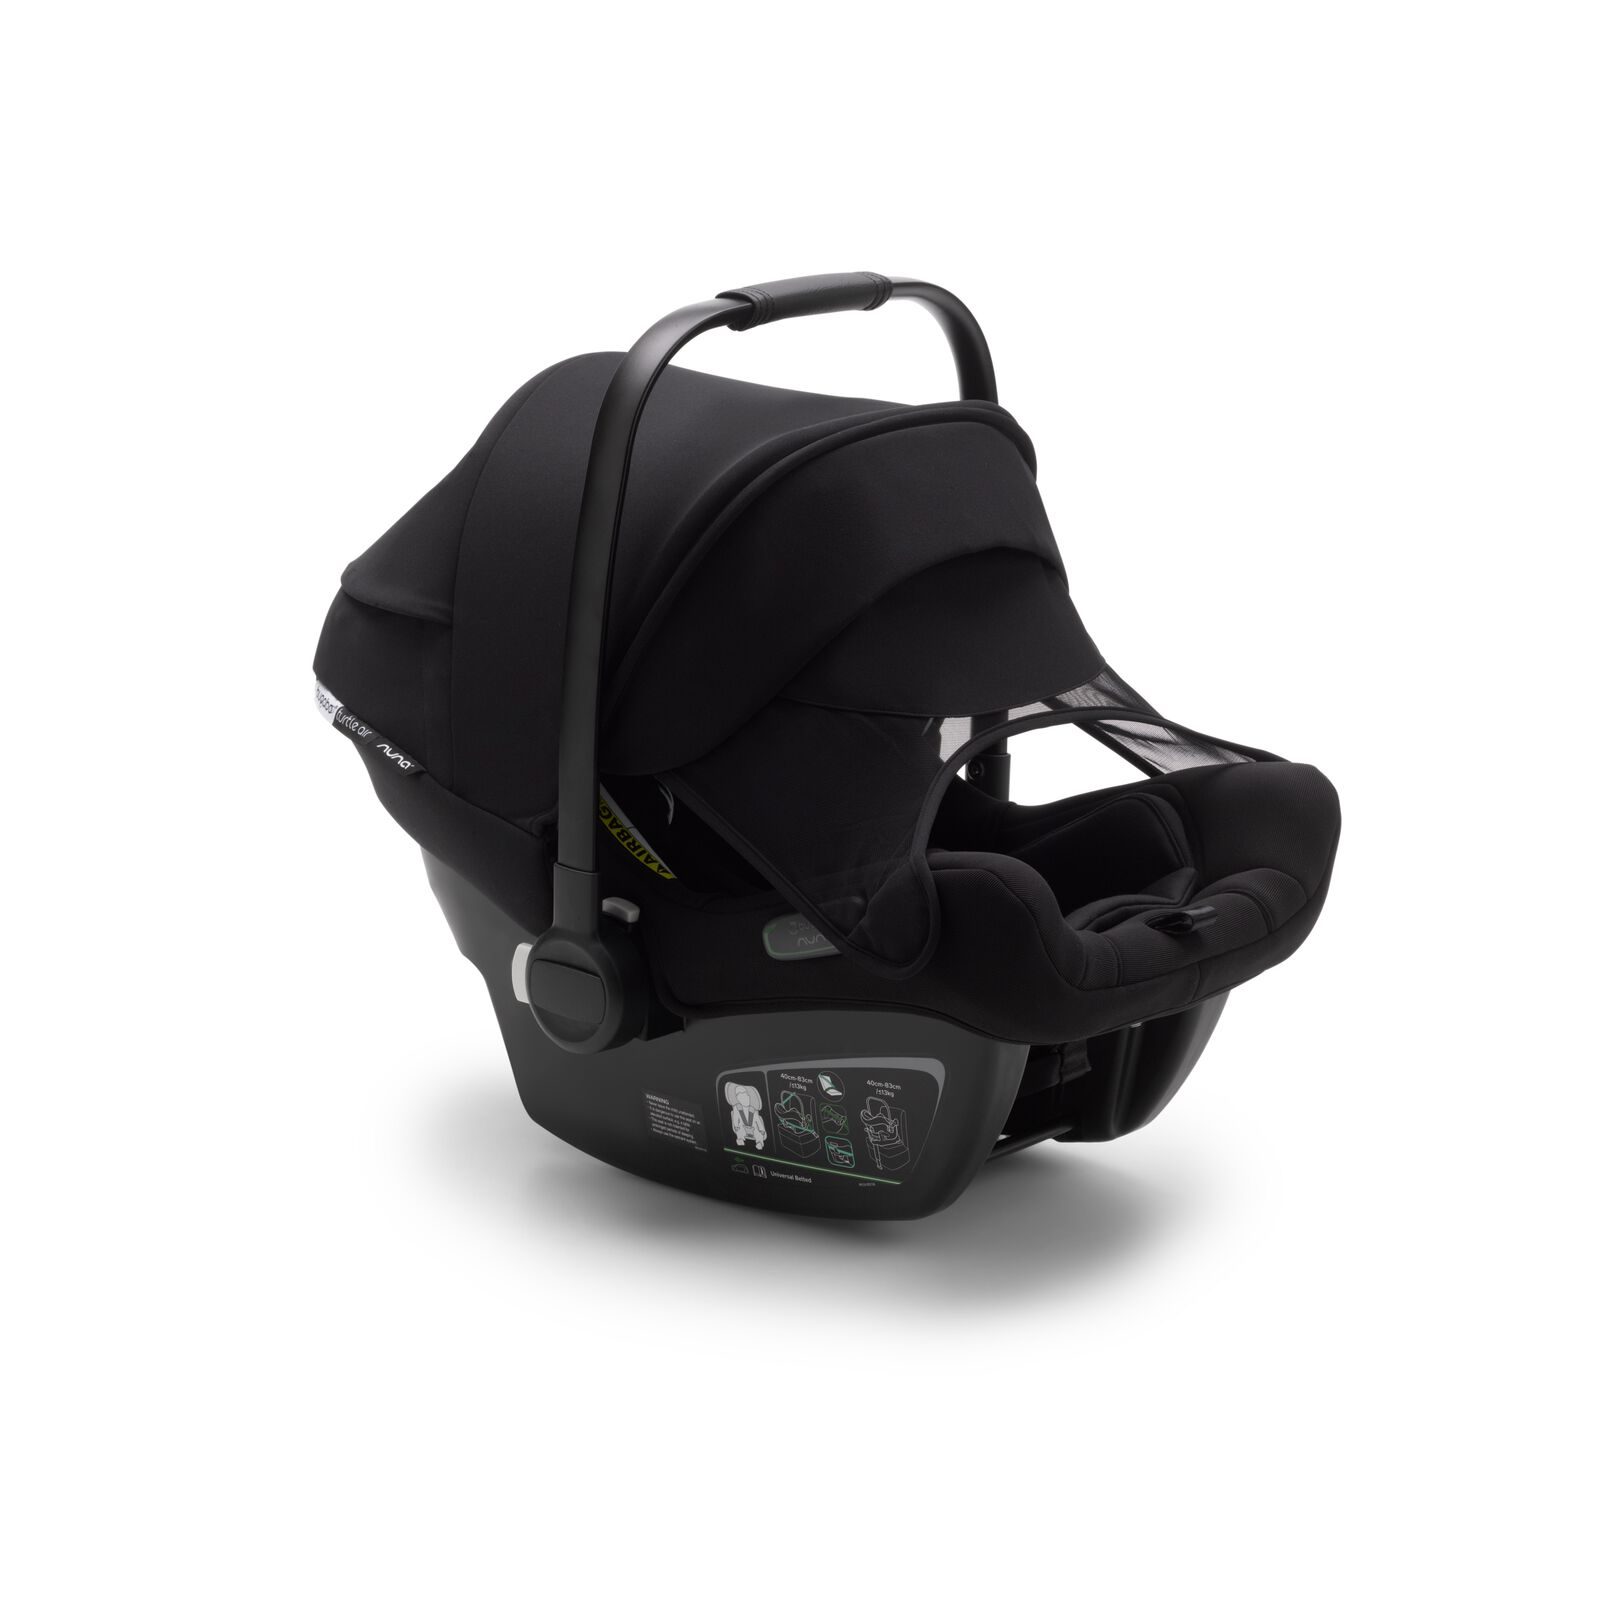 Bugaboo Donkey 3 Twin travel system - View 4